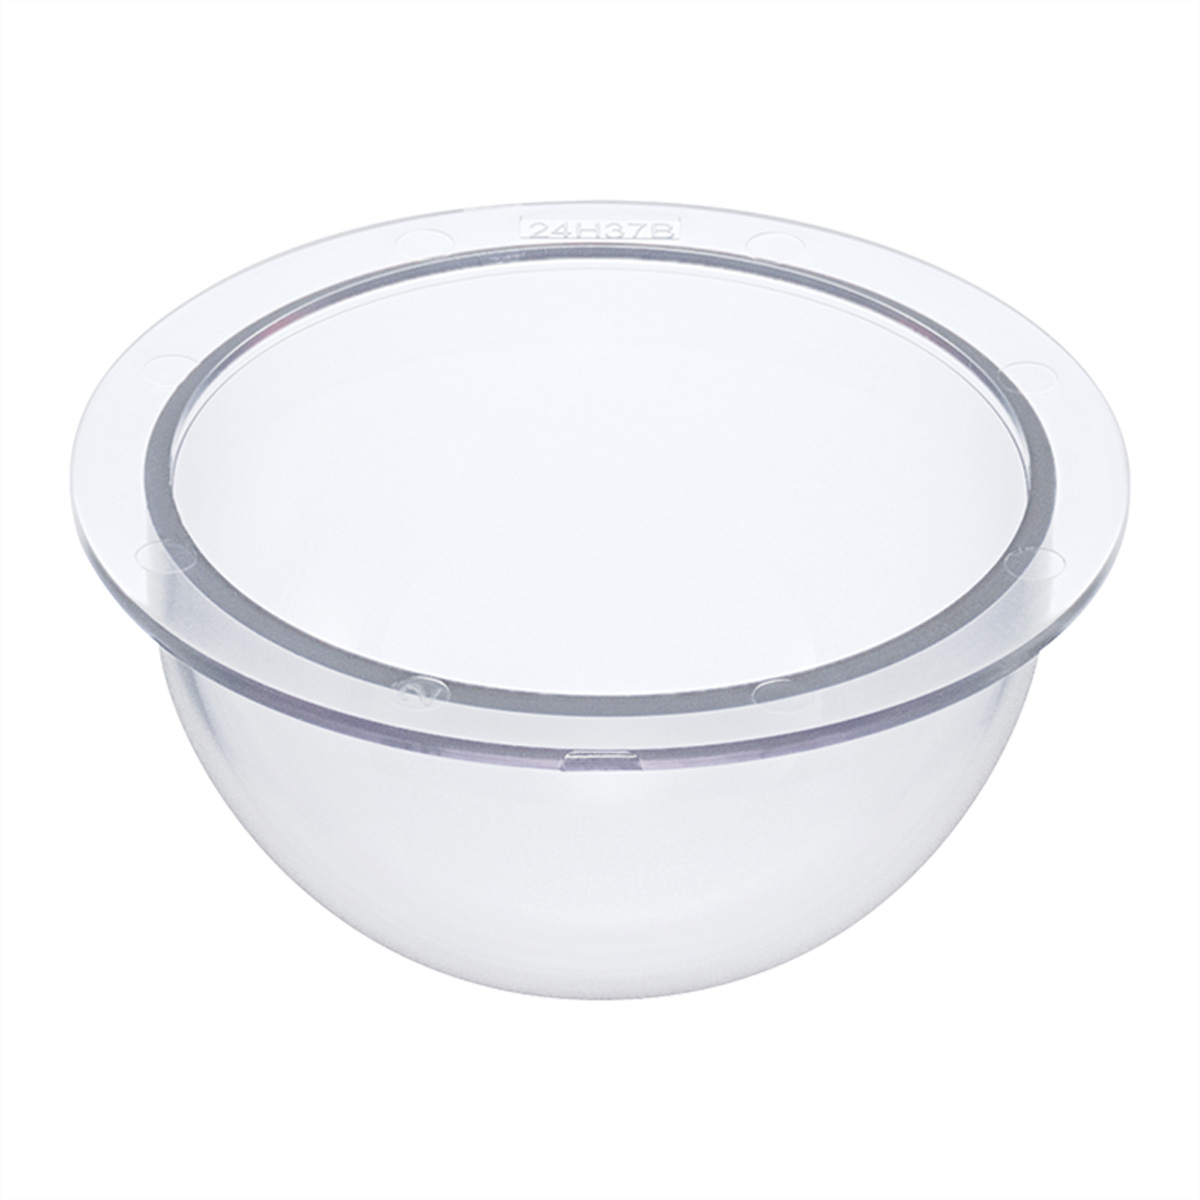 i-PRO WV-QDC500C Bracket, Clear Dome Cover